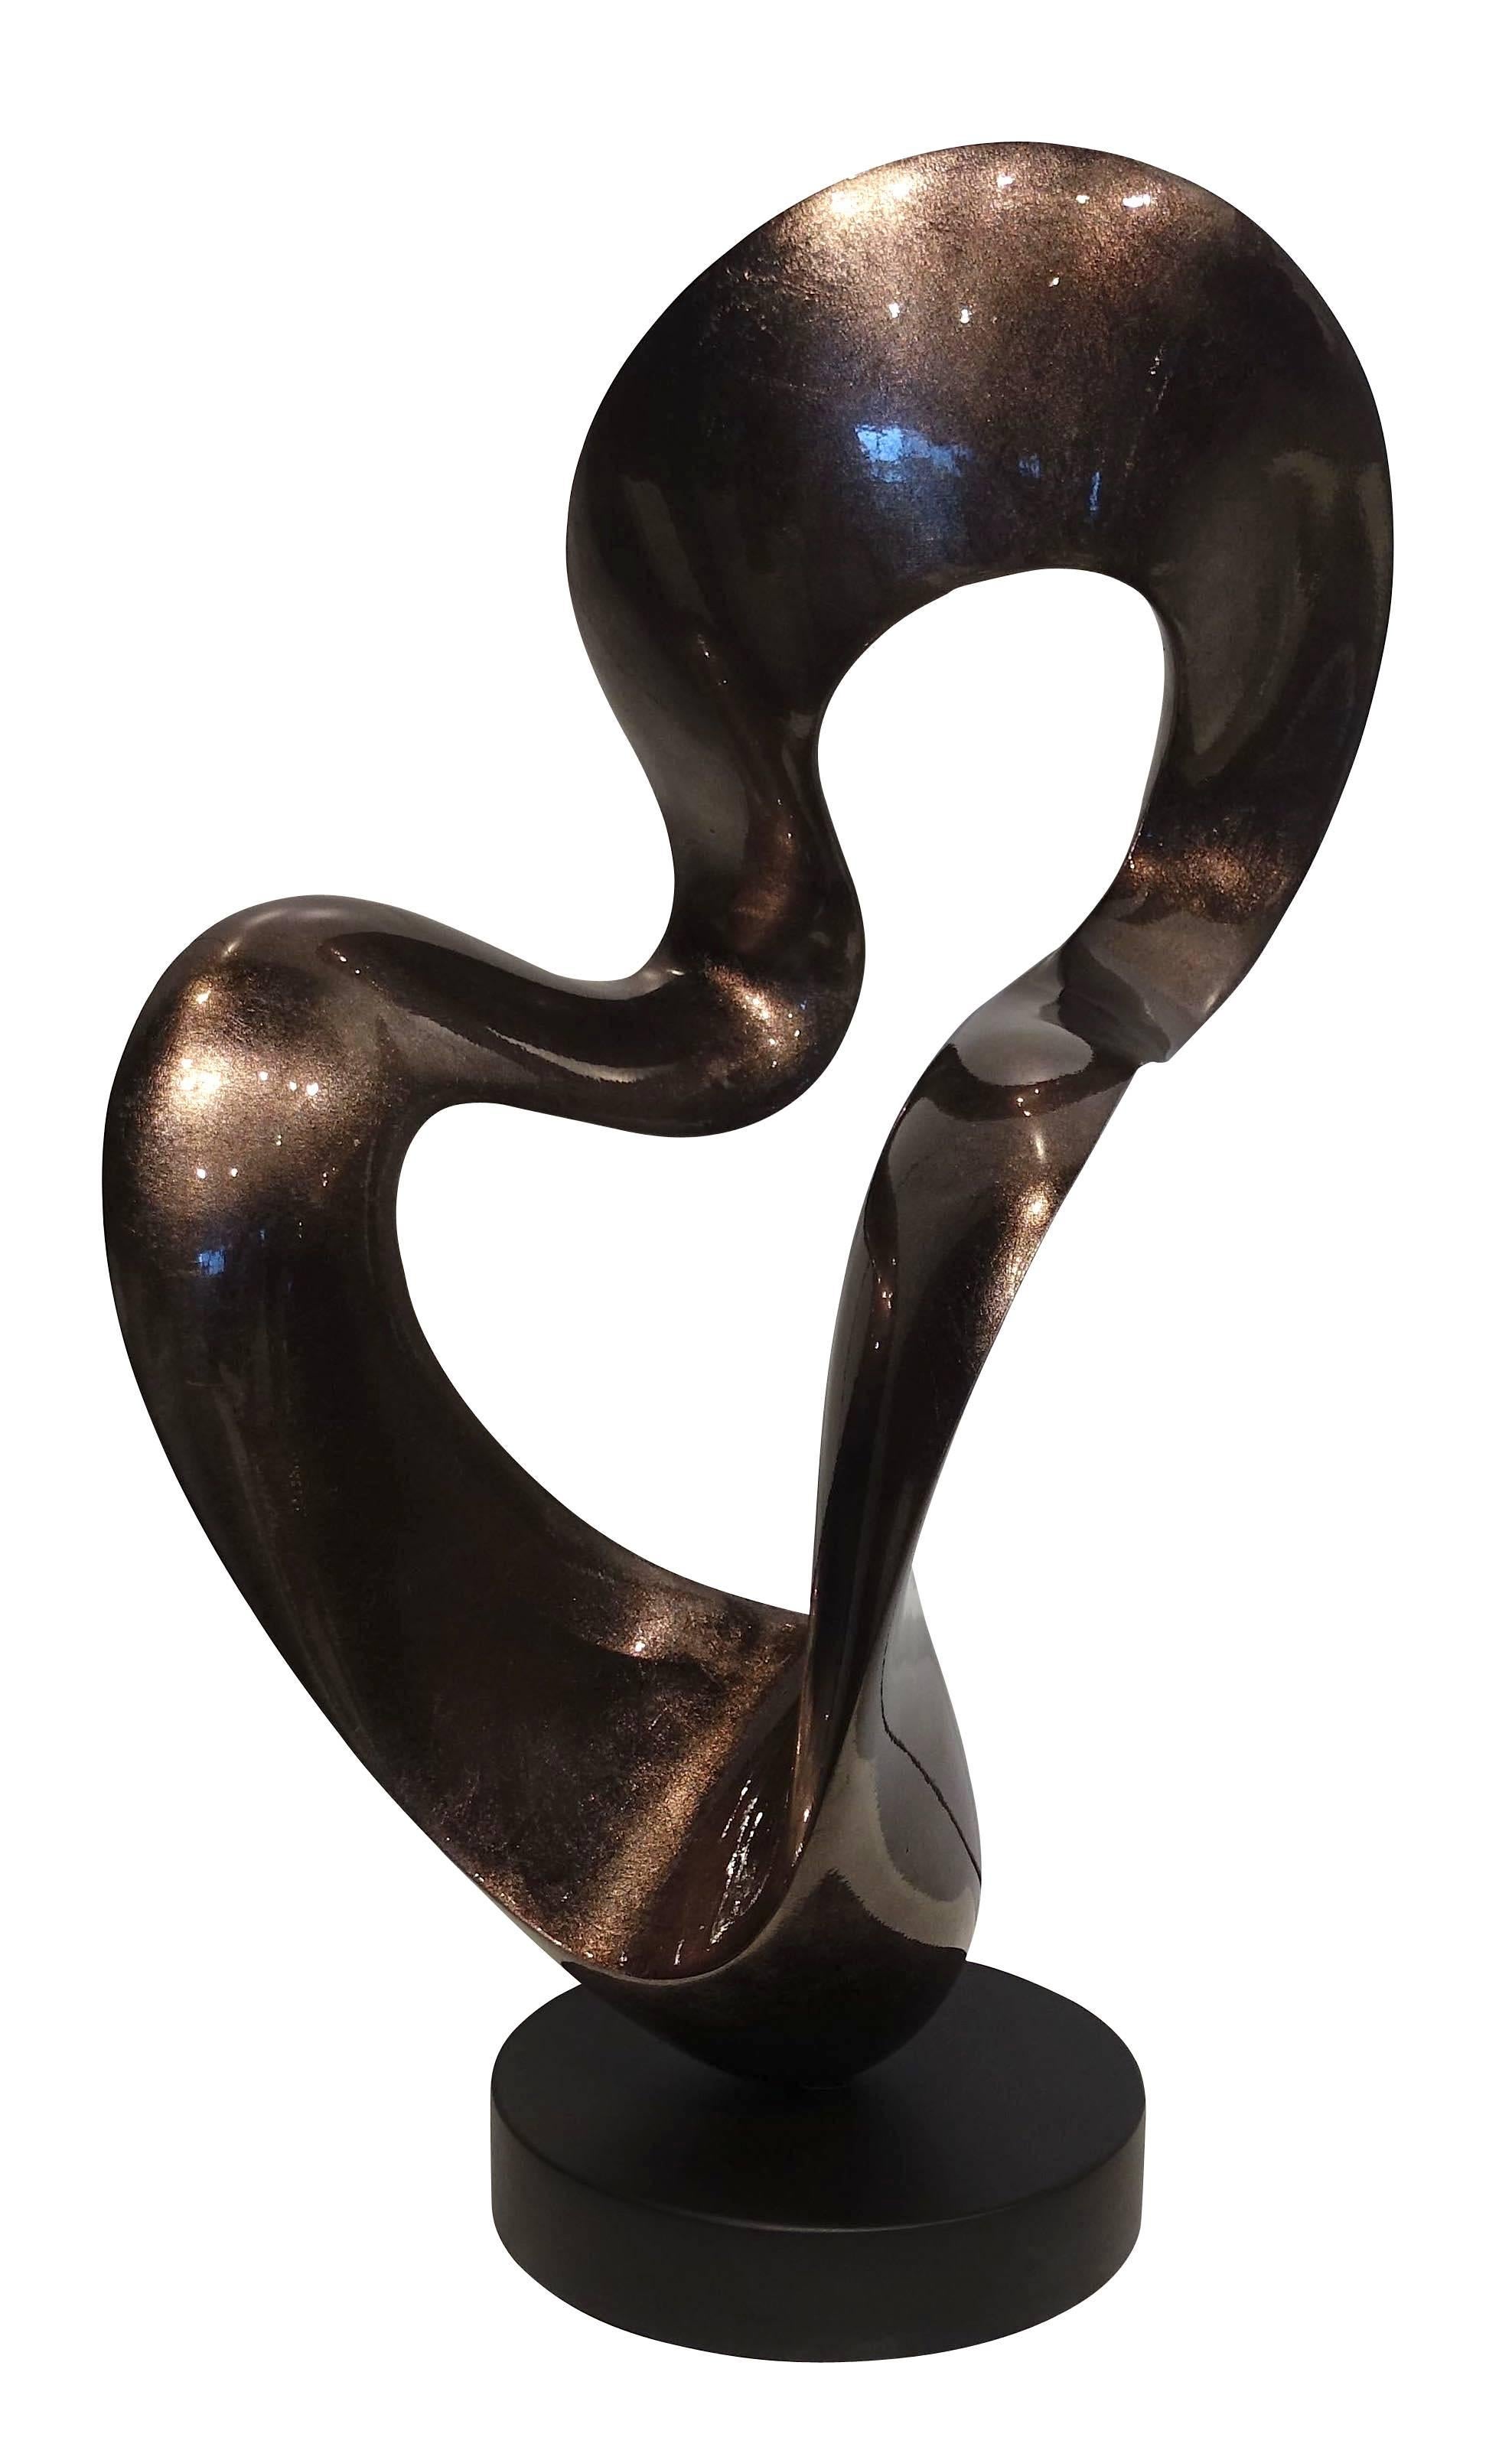 Abstract free-form sculpture.
Wood fiber mixed with composites, multi lacquer finish.